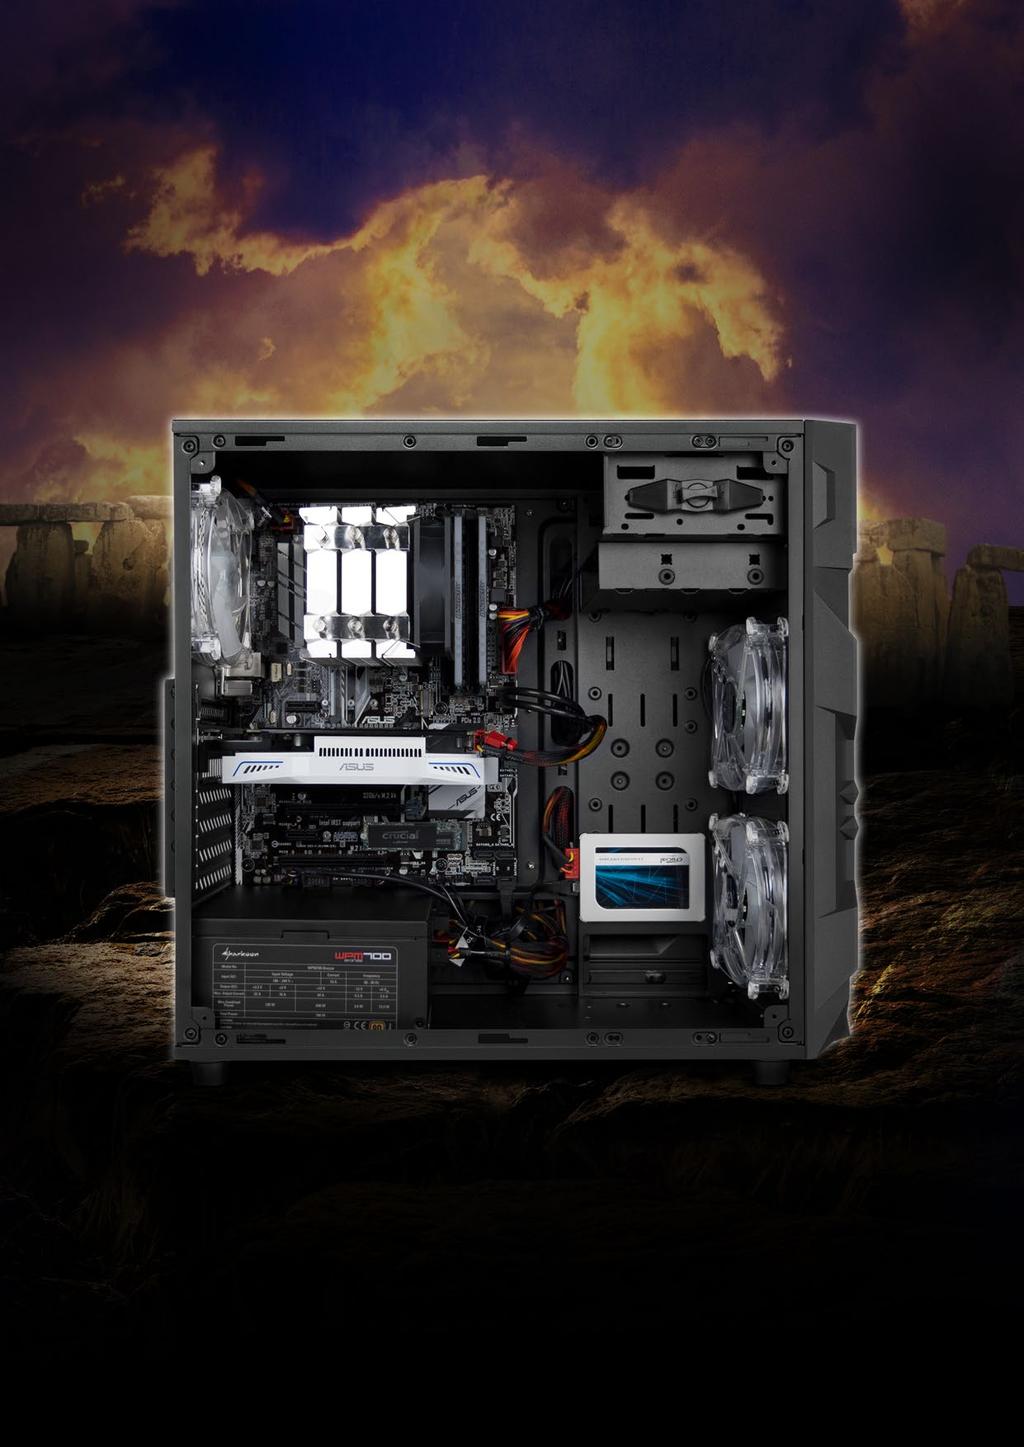 COMPACT CASE DESIGN The VG7-W ATX Midi Tower combines a punchy look with a strong airflow.